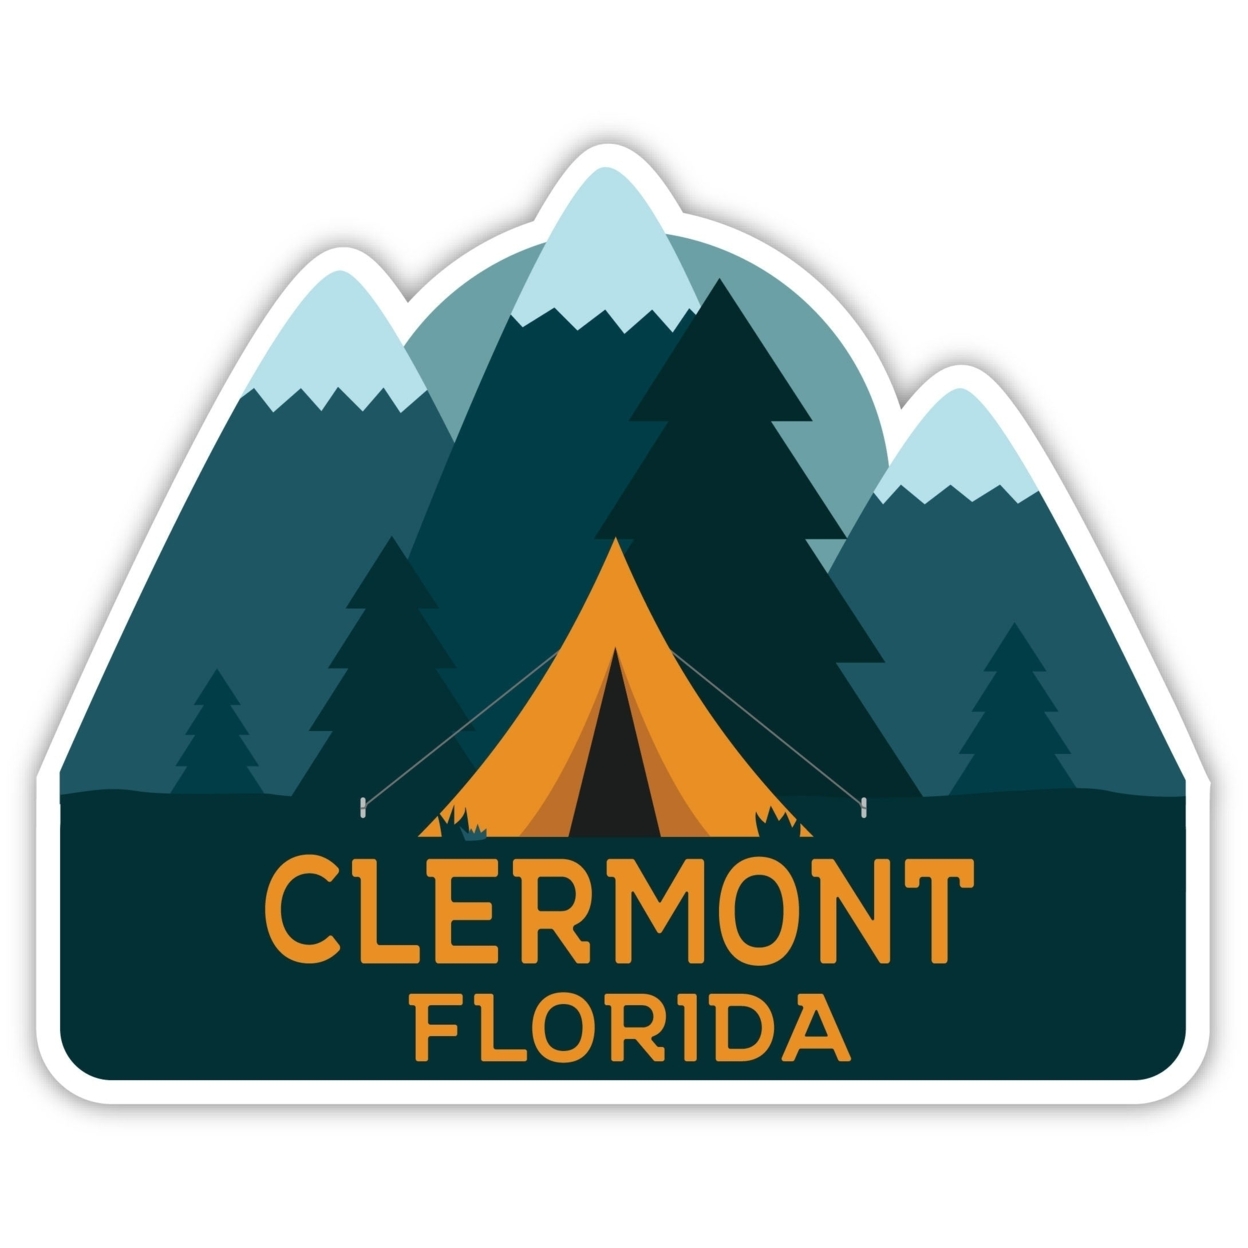 Clermont Florida Souvenir Decorative Stickers (Choose Theme And Size) - 4-Pack, 12-Inch, Tent